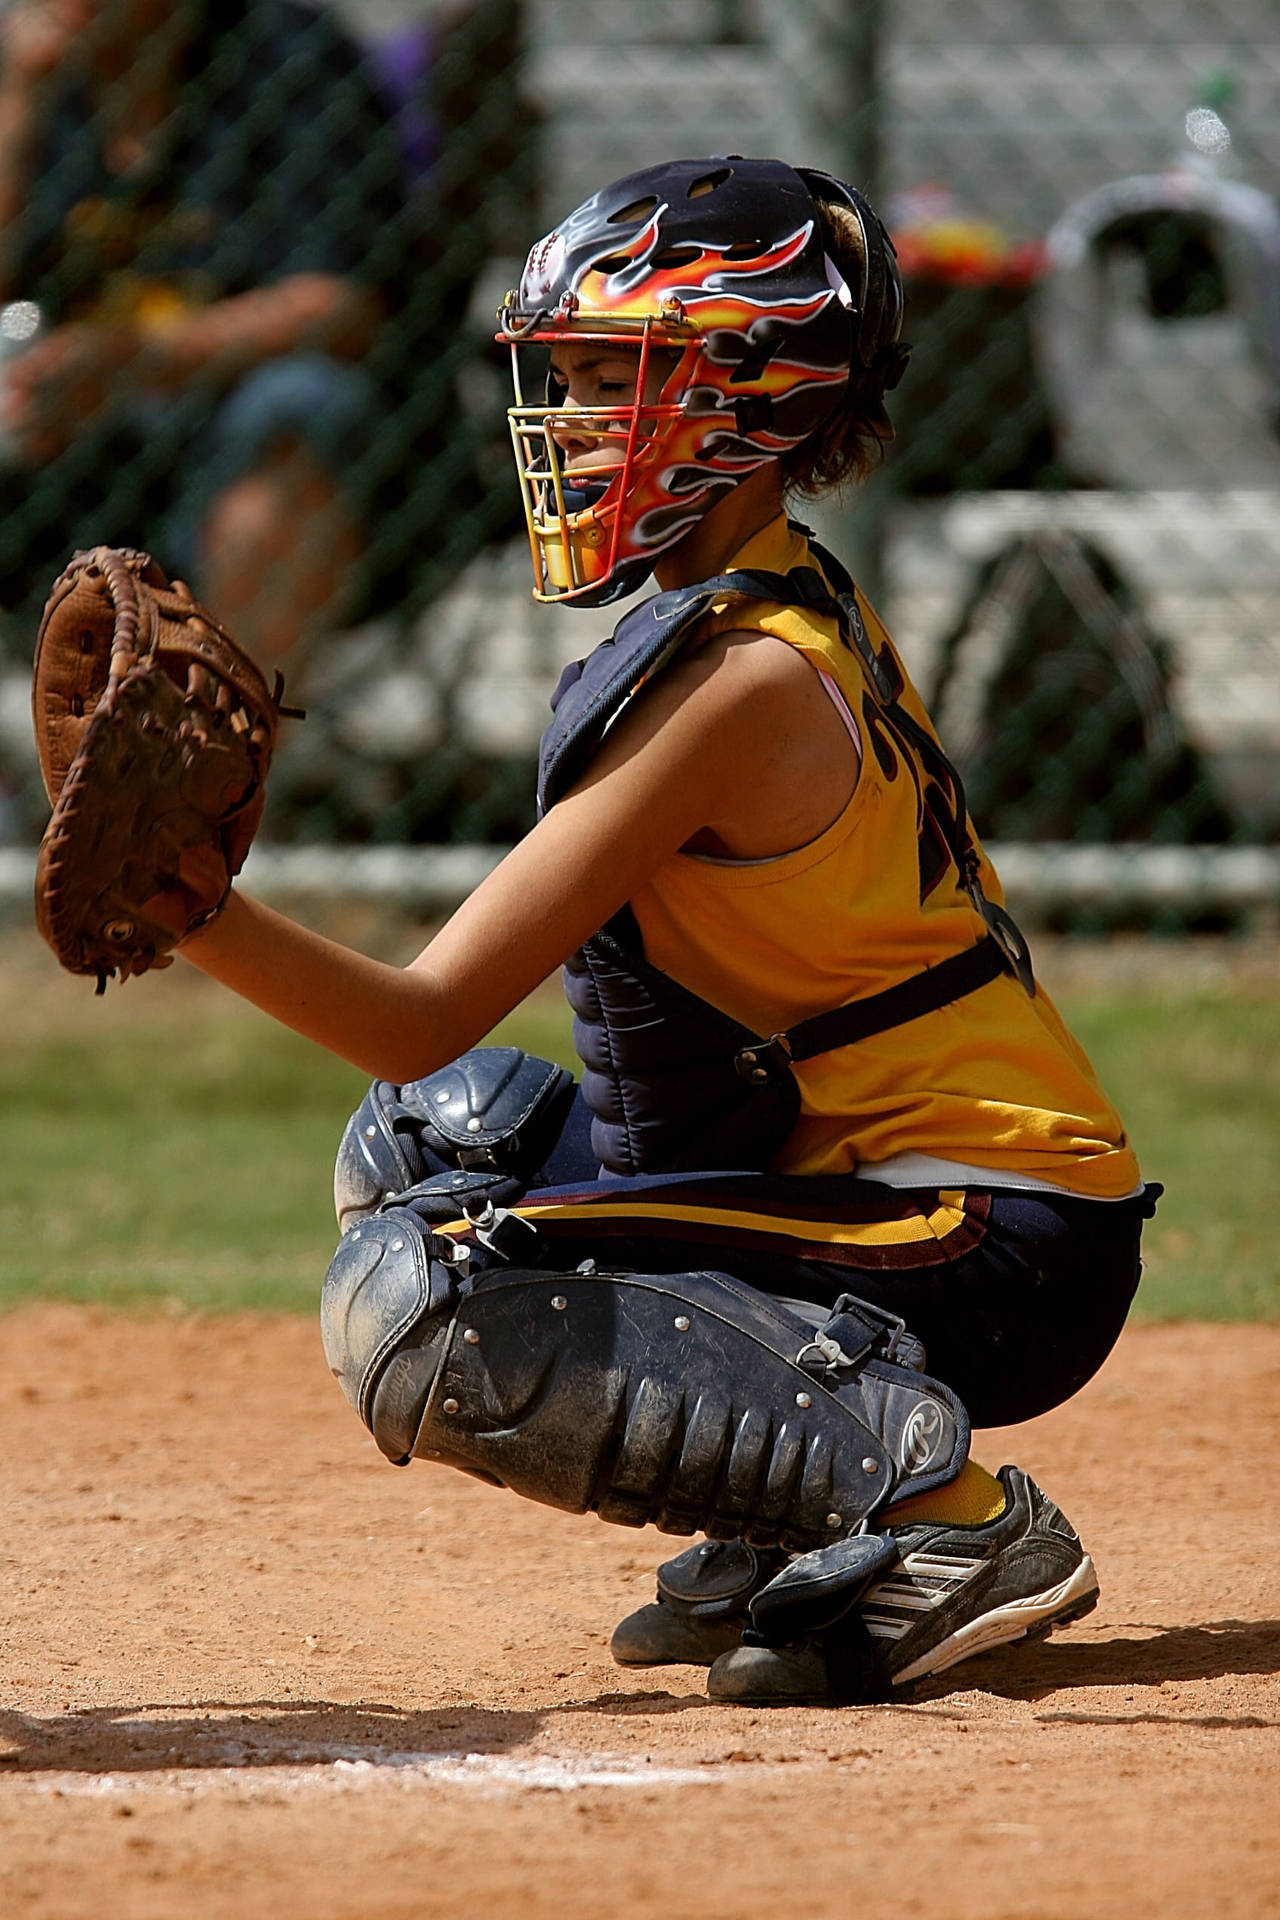 Softball Player Wearing Chest Protector Wallpaper